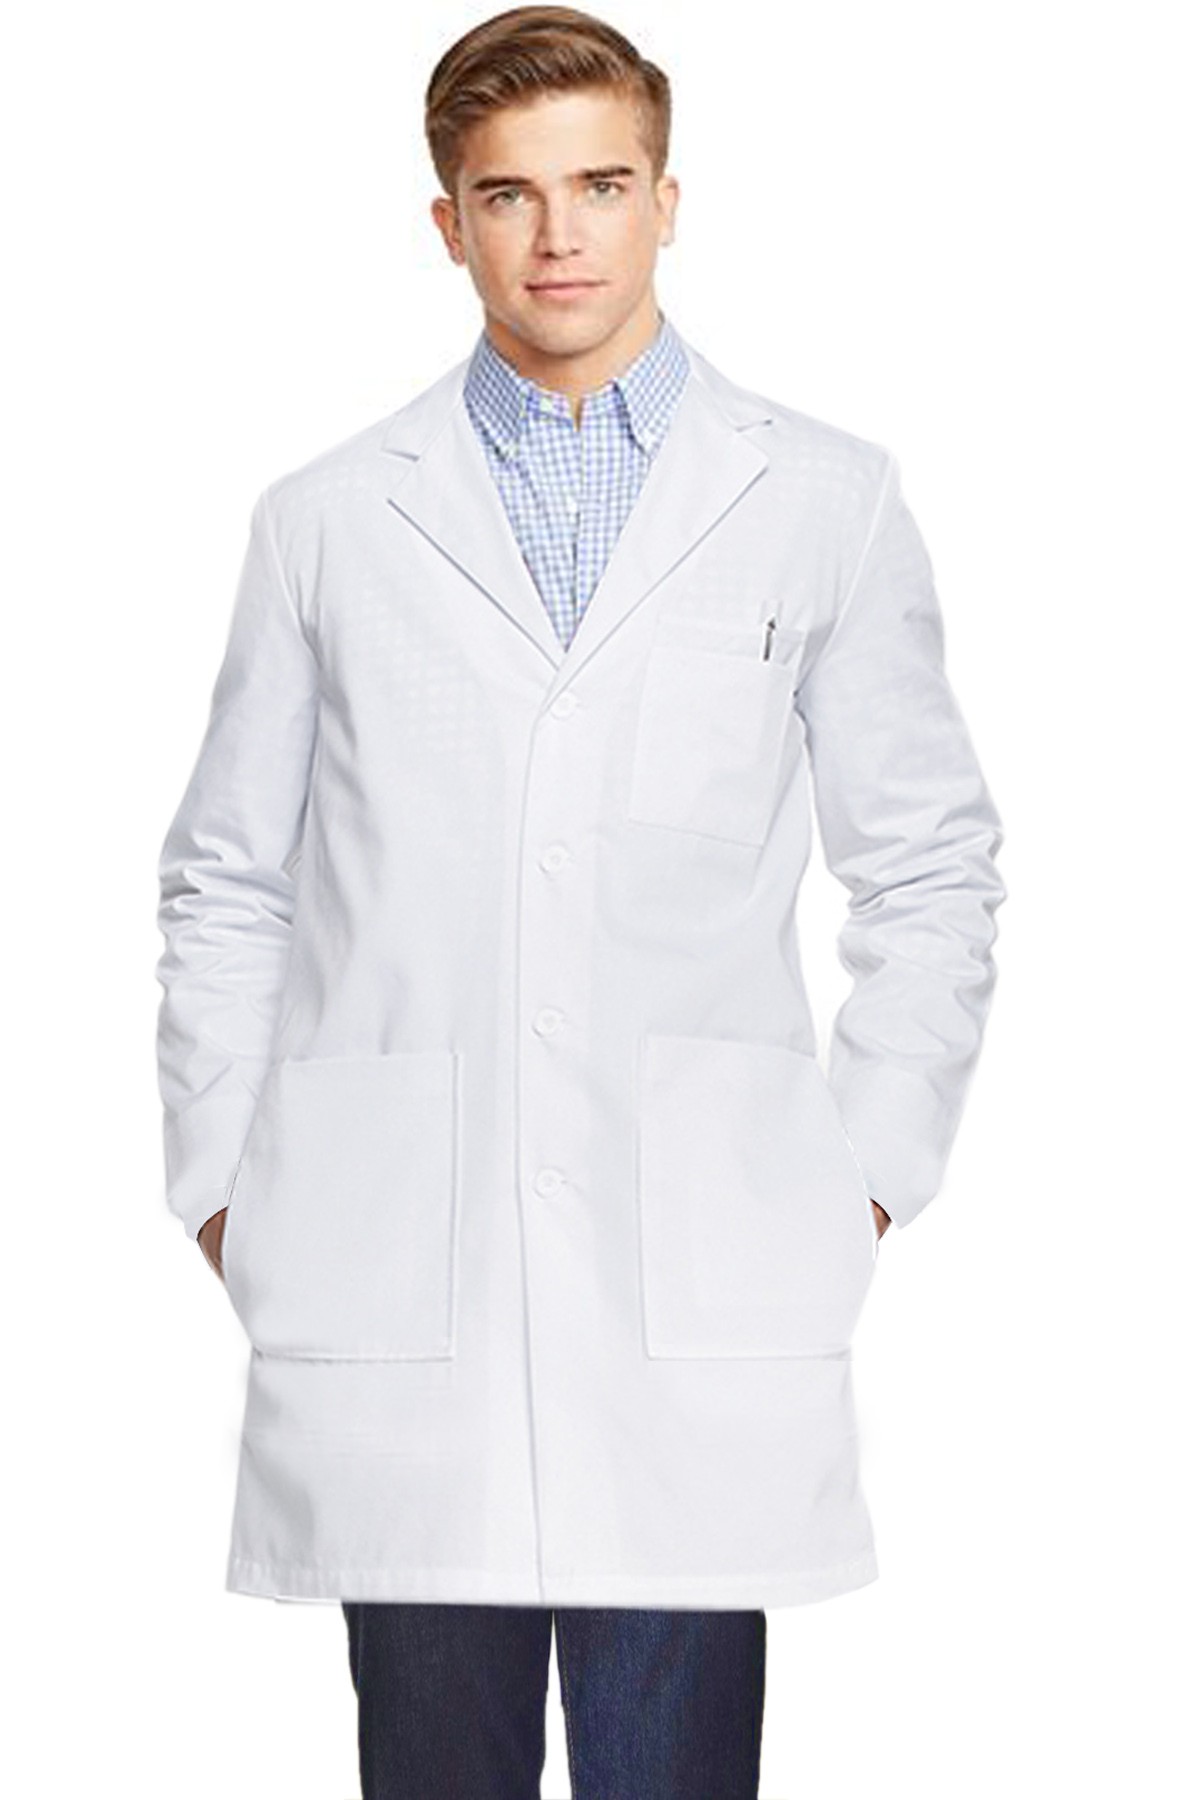 Microfiber labcoat unisex full sleeve with plastic buttons 3 front pockets with side inside pockets(access to pockets from side)  (100% polyester)  in 36 38 40 42 lengths